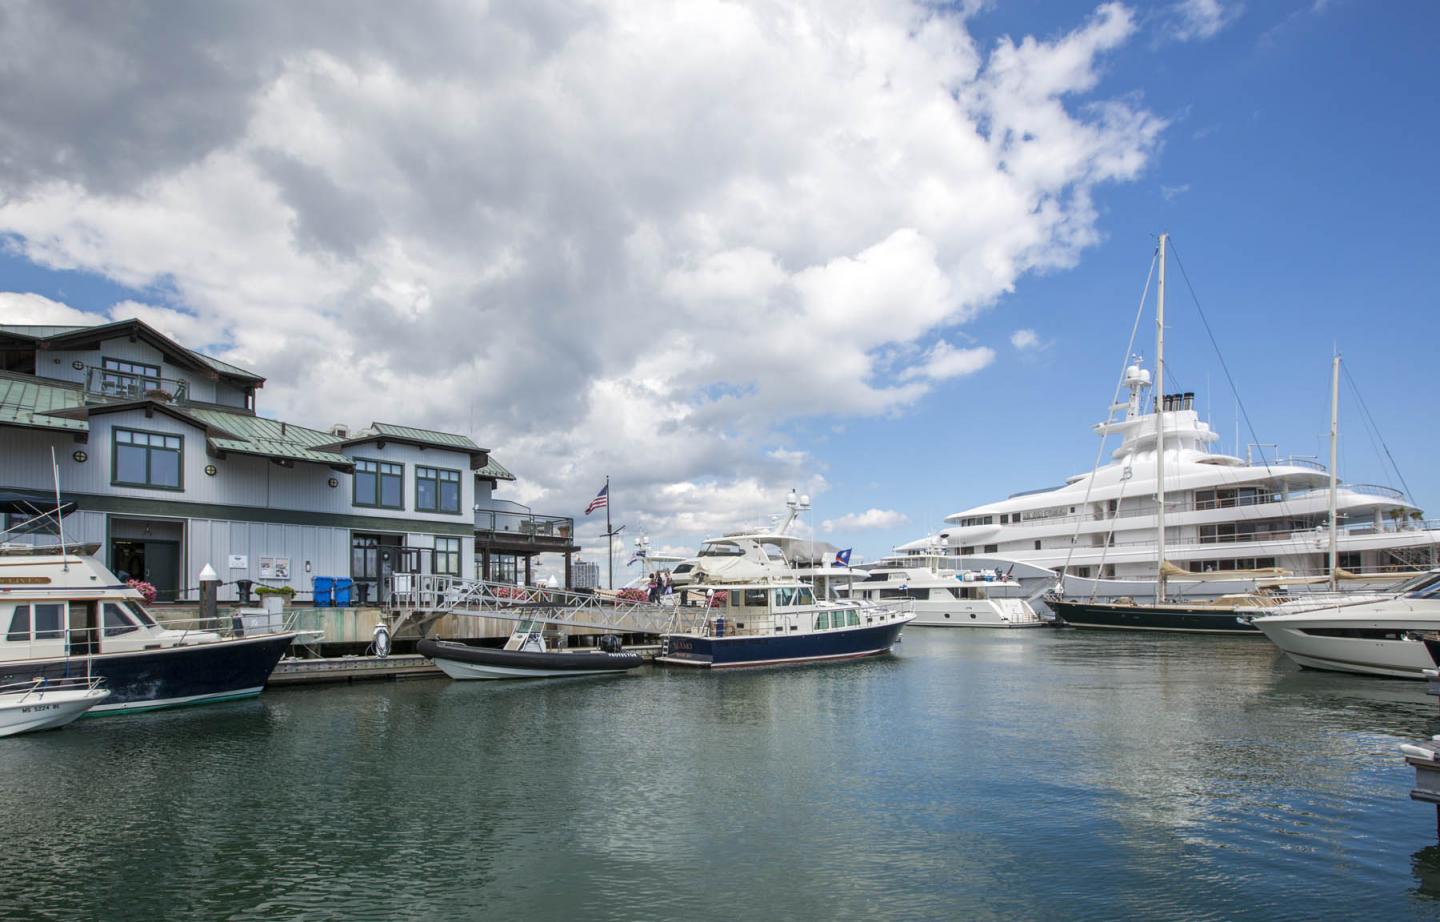 The marina on the water with a yacht